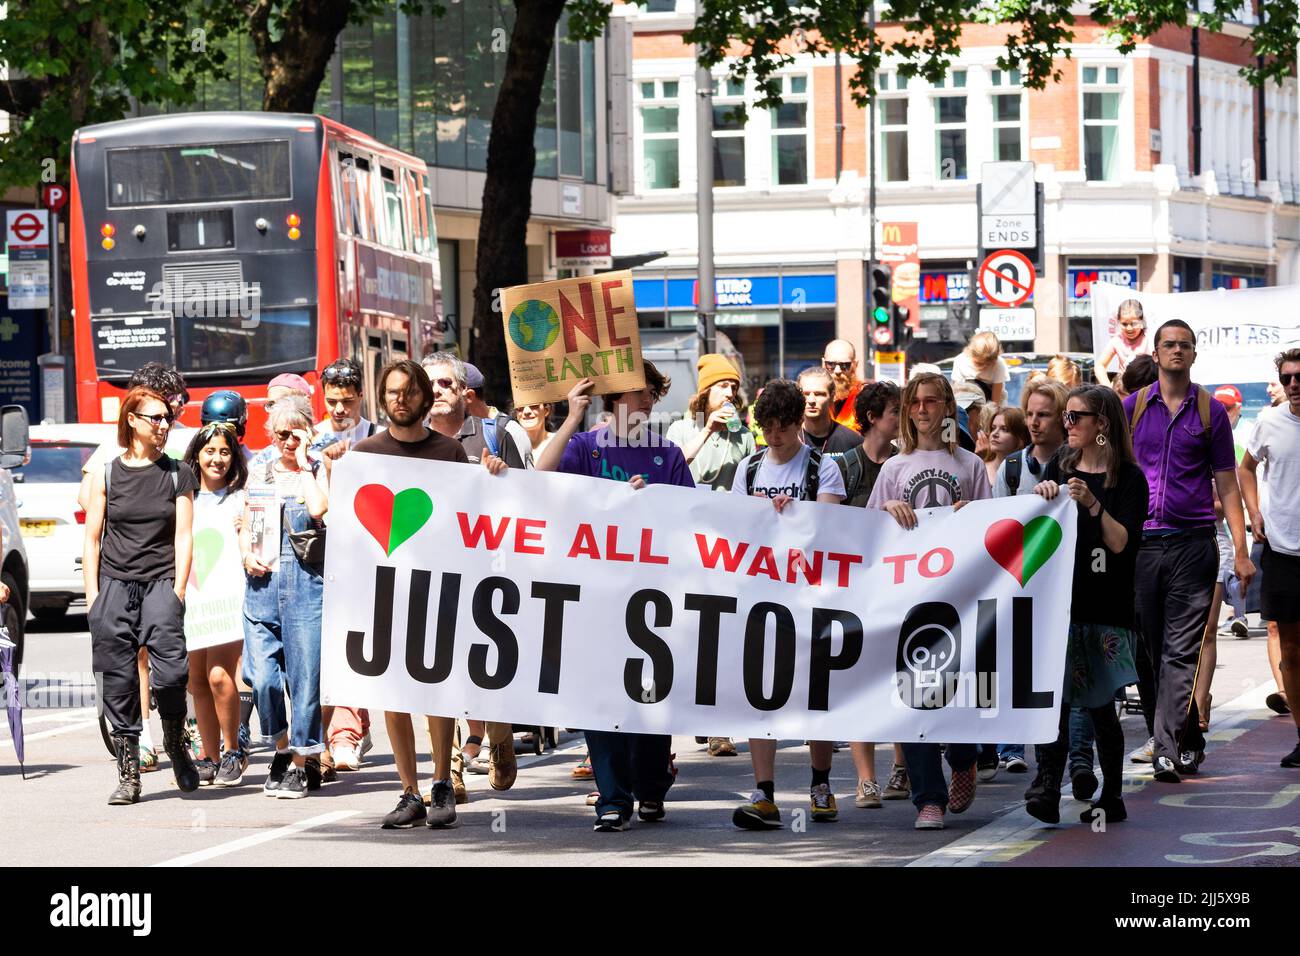 London, UK. 23rd July 2022. We All Want To Just Stop Oil Coalition: National March & Sit Down. One of many marches that converged upon Westminster.  Marchers holding We All Want To Just Stop Oil banner. Credit: Stephen Bell/Alamy Live News Stock Photo